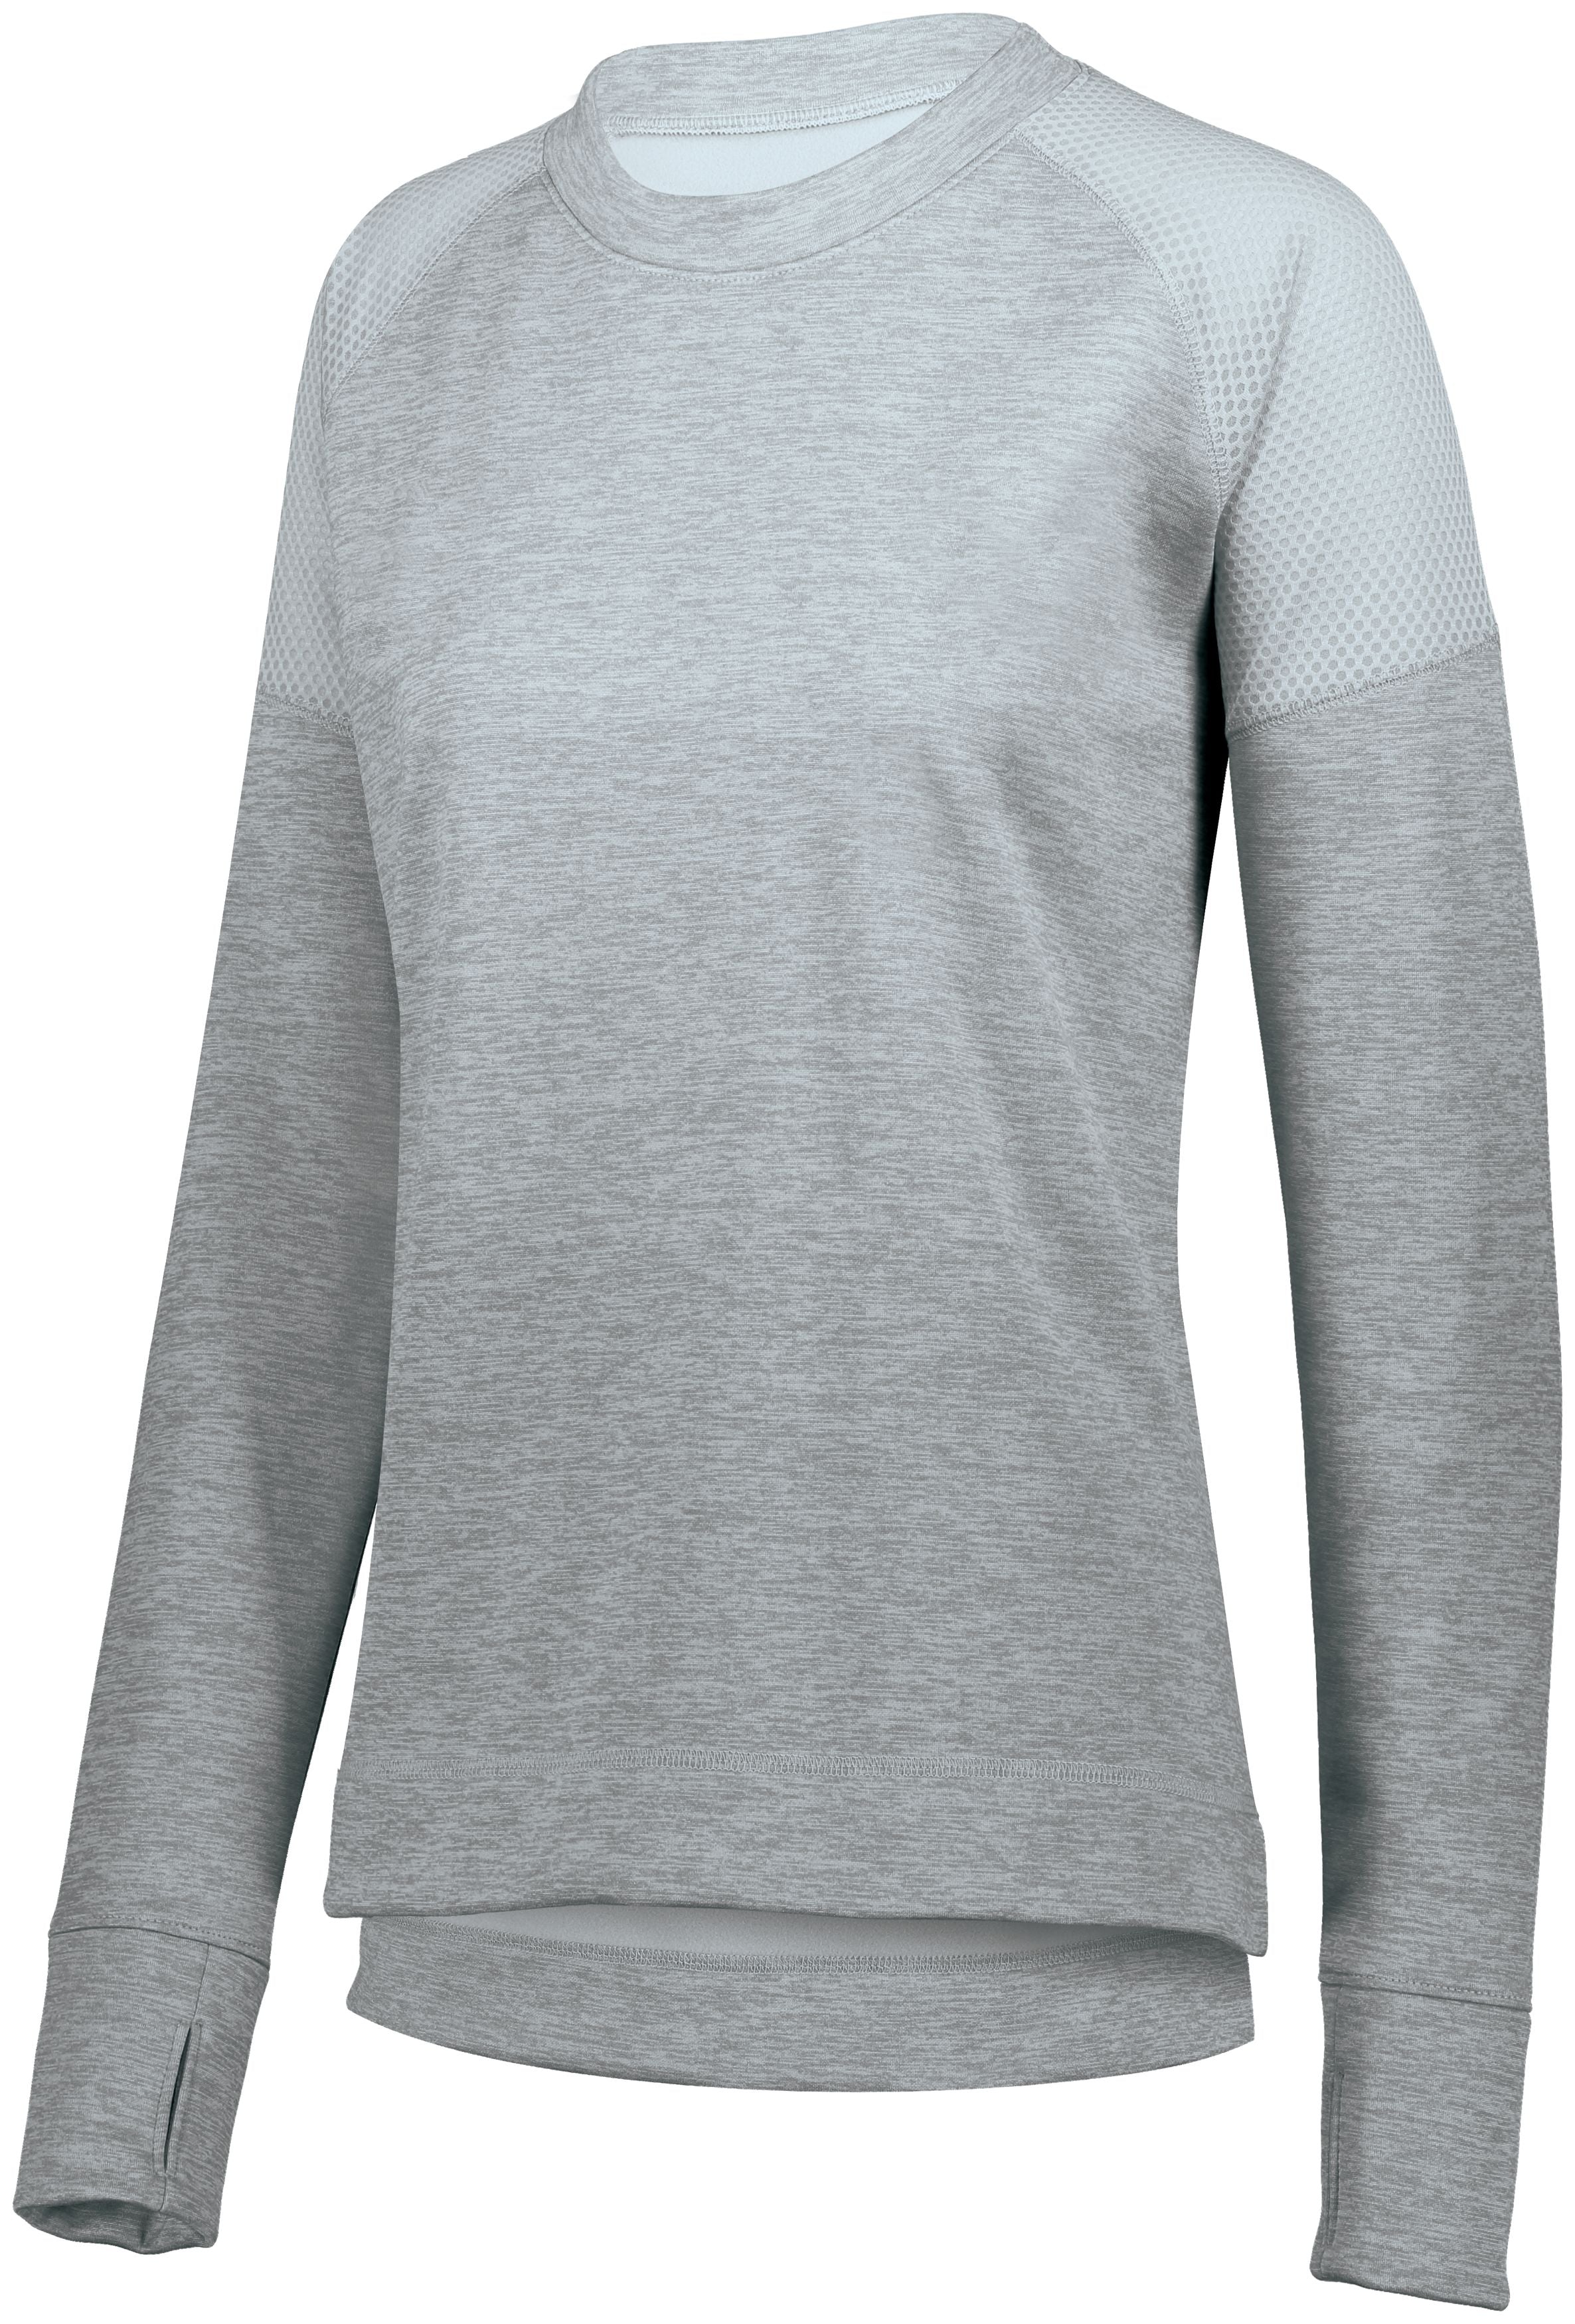 Augusta Sportswear Ladies Zoe Tonal Heather Pullover in Silver  -Part of the Ladies, Ladies-Pullover, Augusta-Products, Outerwear, Tonal-Fleece-Collection product lines at KanaleyCreations.com